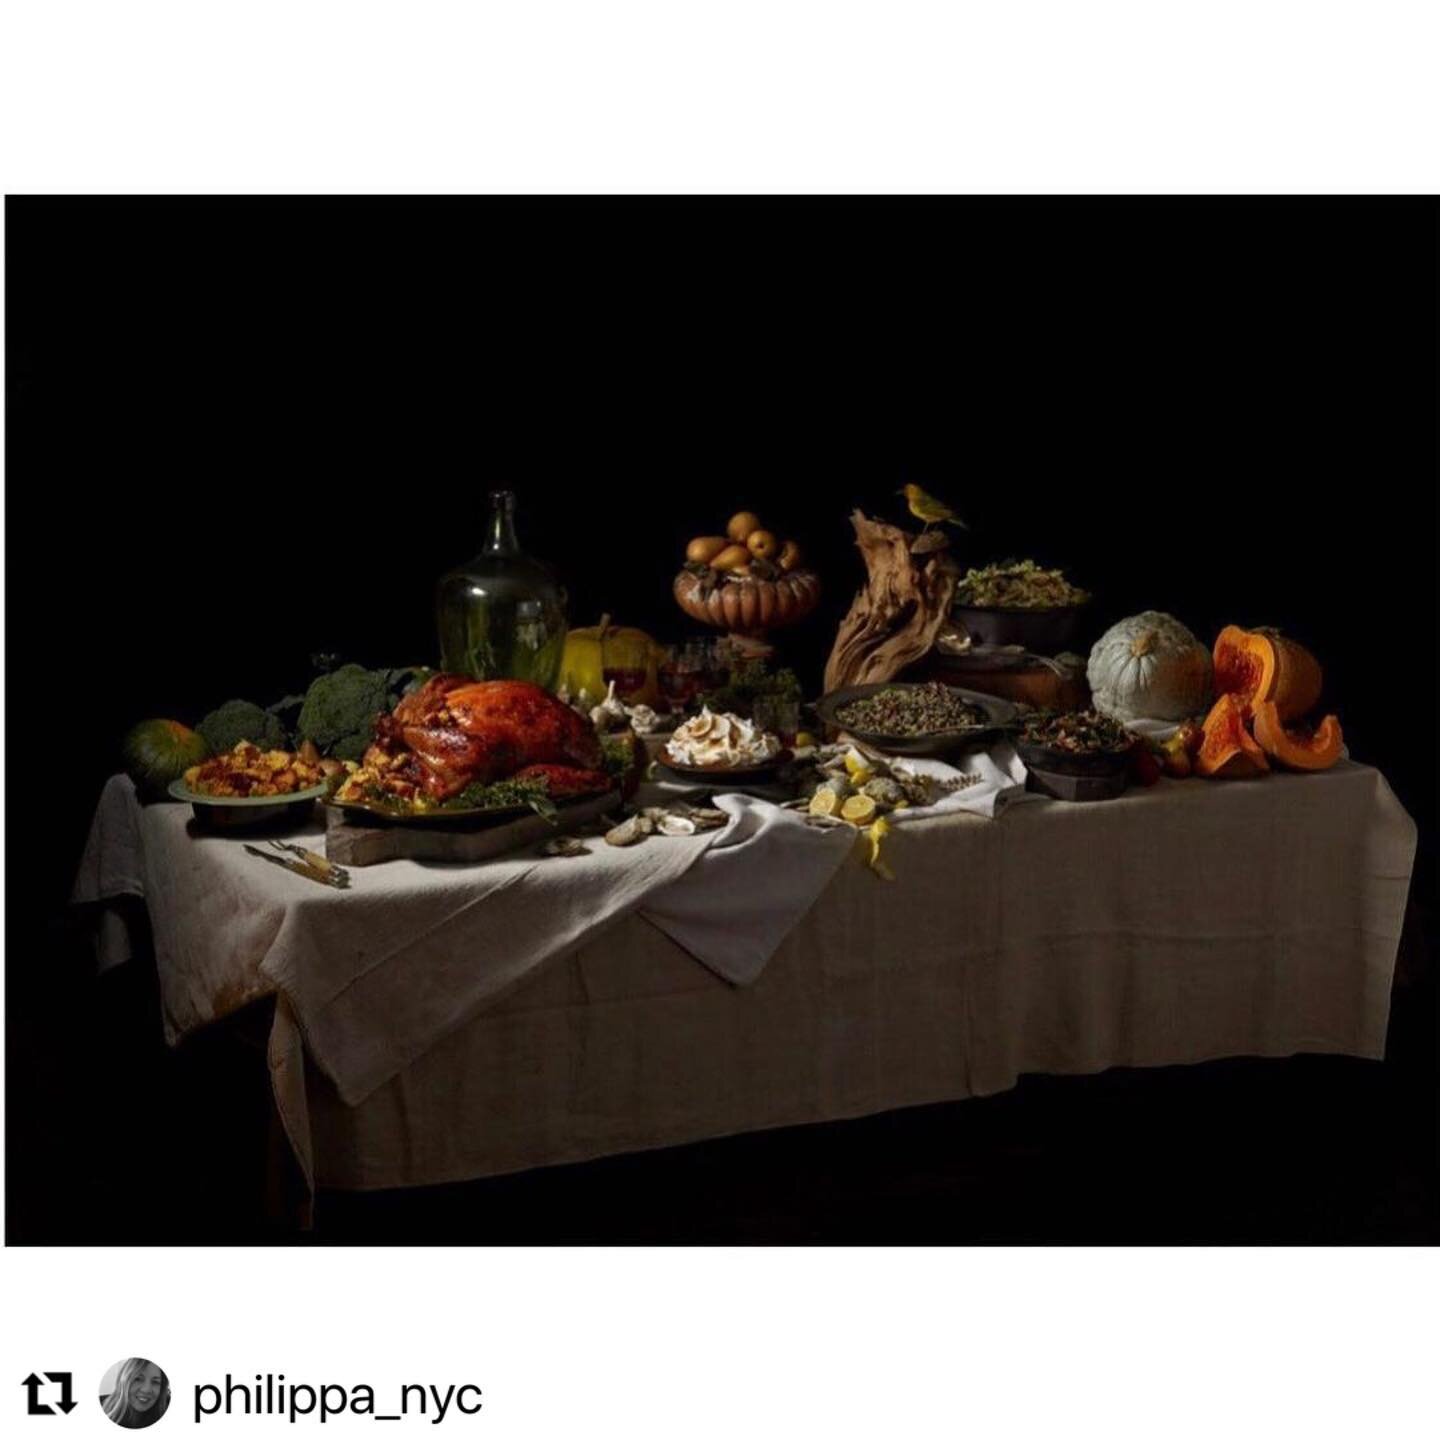 #Repost @philippa_nyc with @use.repost
・・・
&ldquo; Just a little something I threw together for Thanksgiving &ldquo; said no one , ever ! A favorite shoot with @nymag ( special thanks to @jodyquon ). Photograph by @zaczavv , food styling @attenboroug